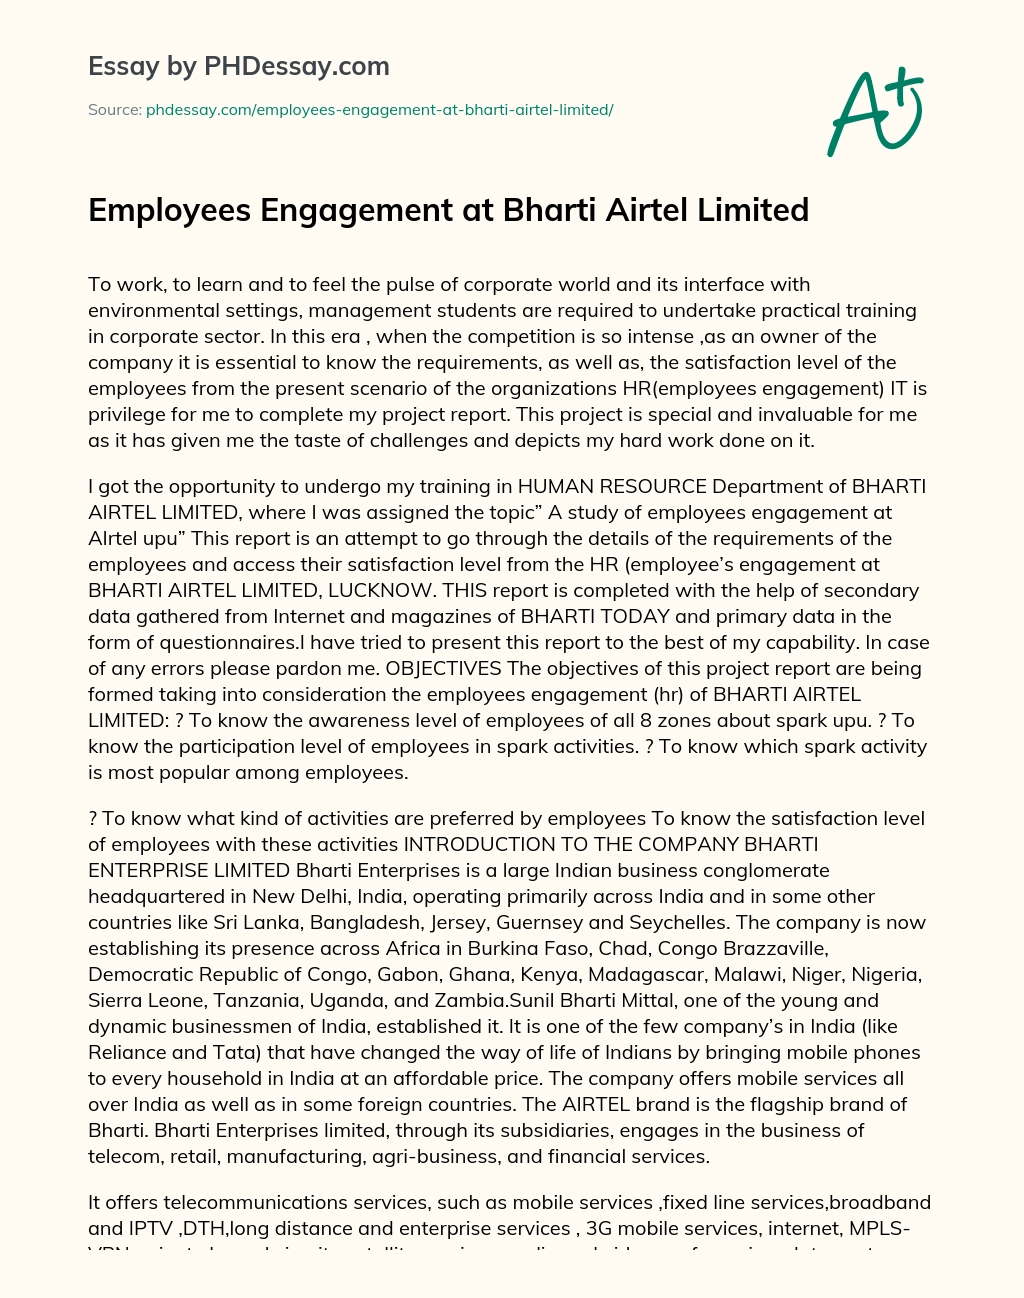 Employees Engagement at Bharti Airtel Limited essay